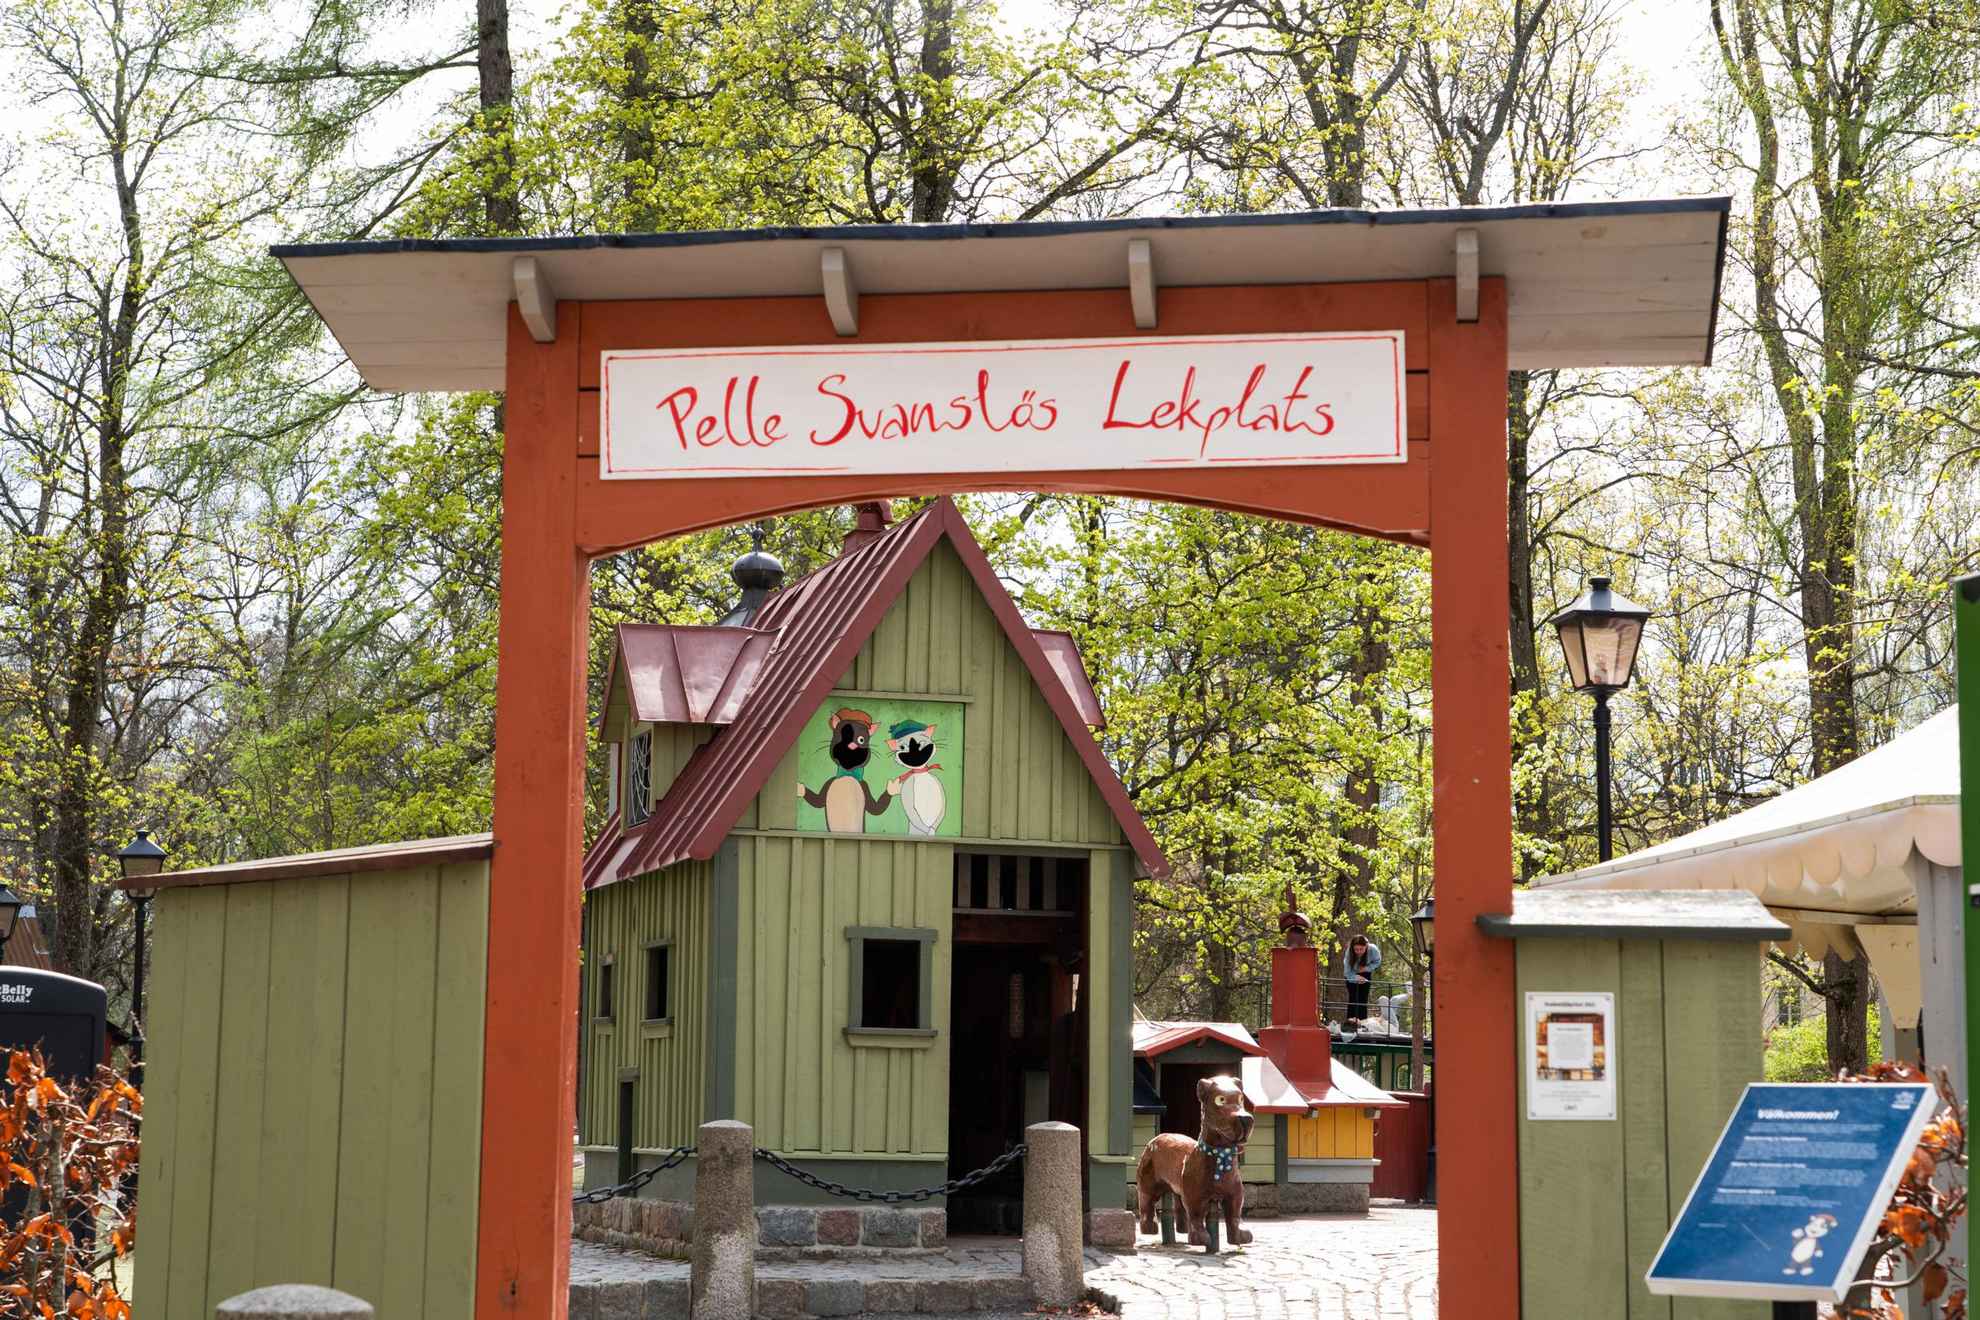 The entrance to Pelle Svanslös (‘Peter-no-tail’) playground.